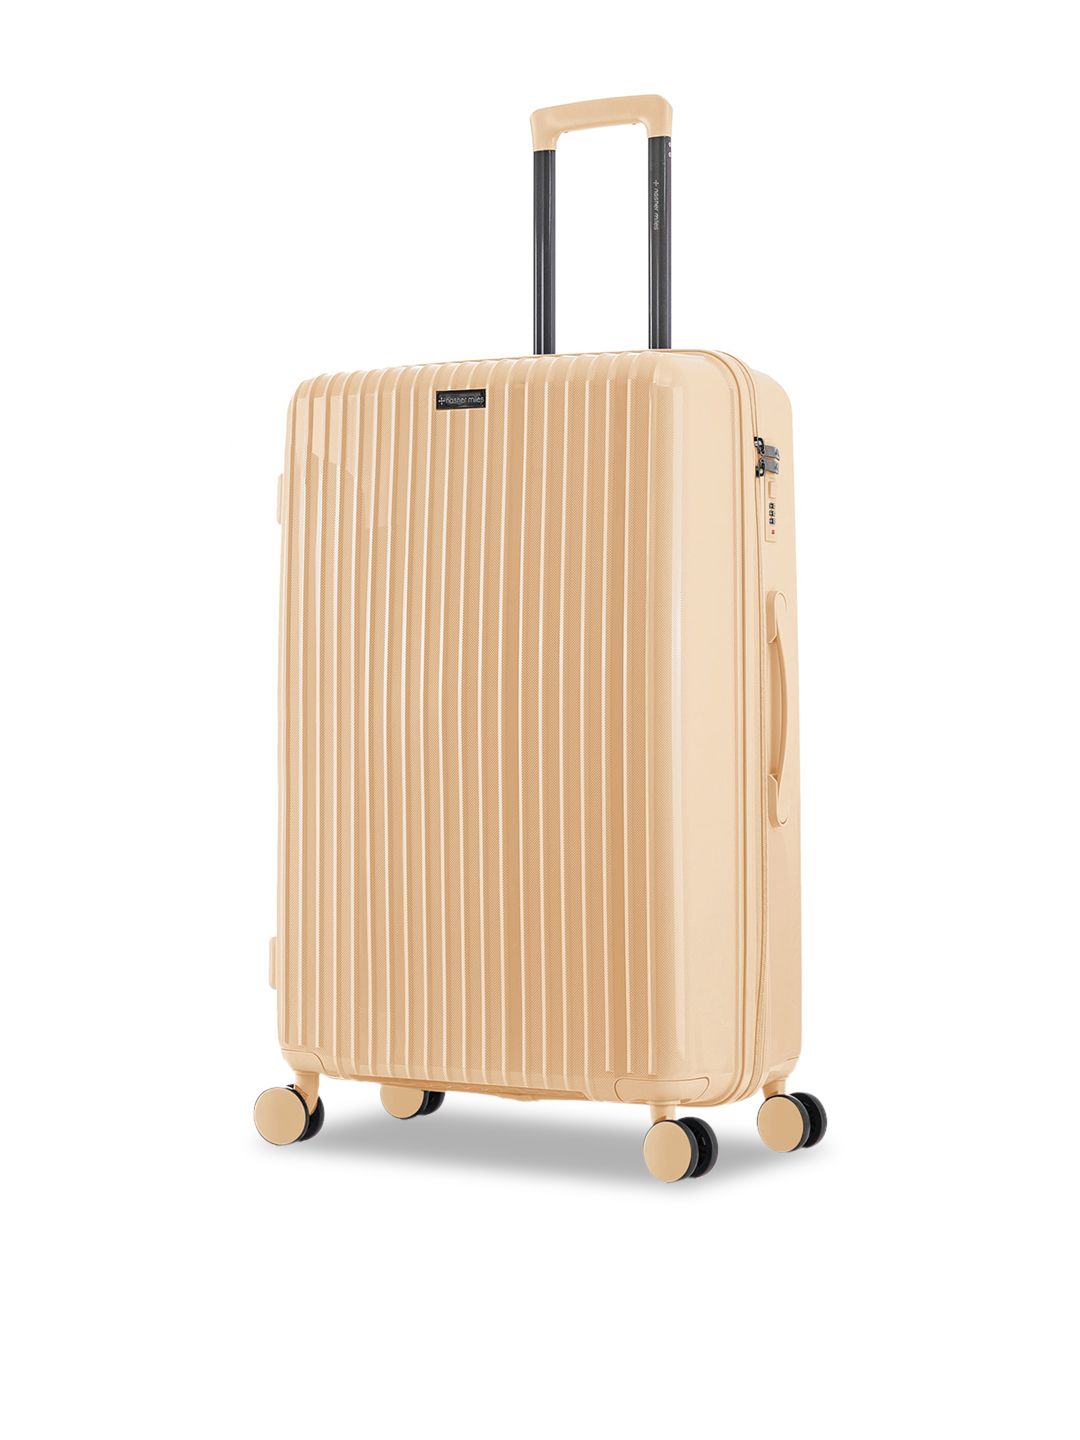 Nasher Miles Peach Colored Textured Hard-Sided Cabin Trolley Suitcase Price in India